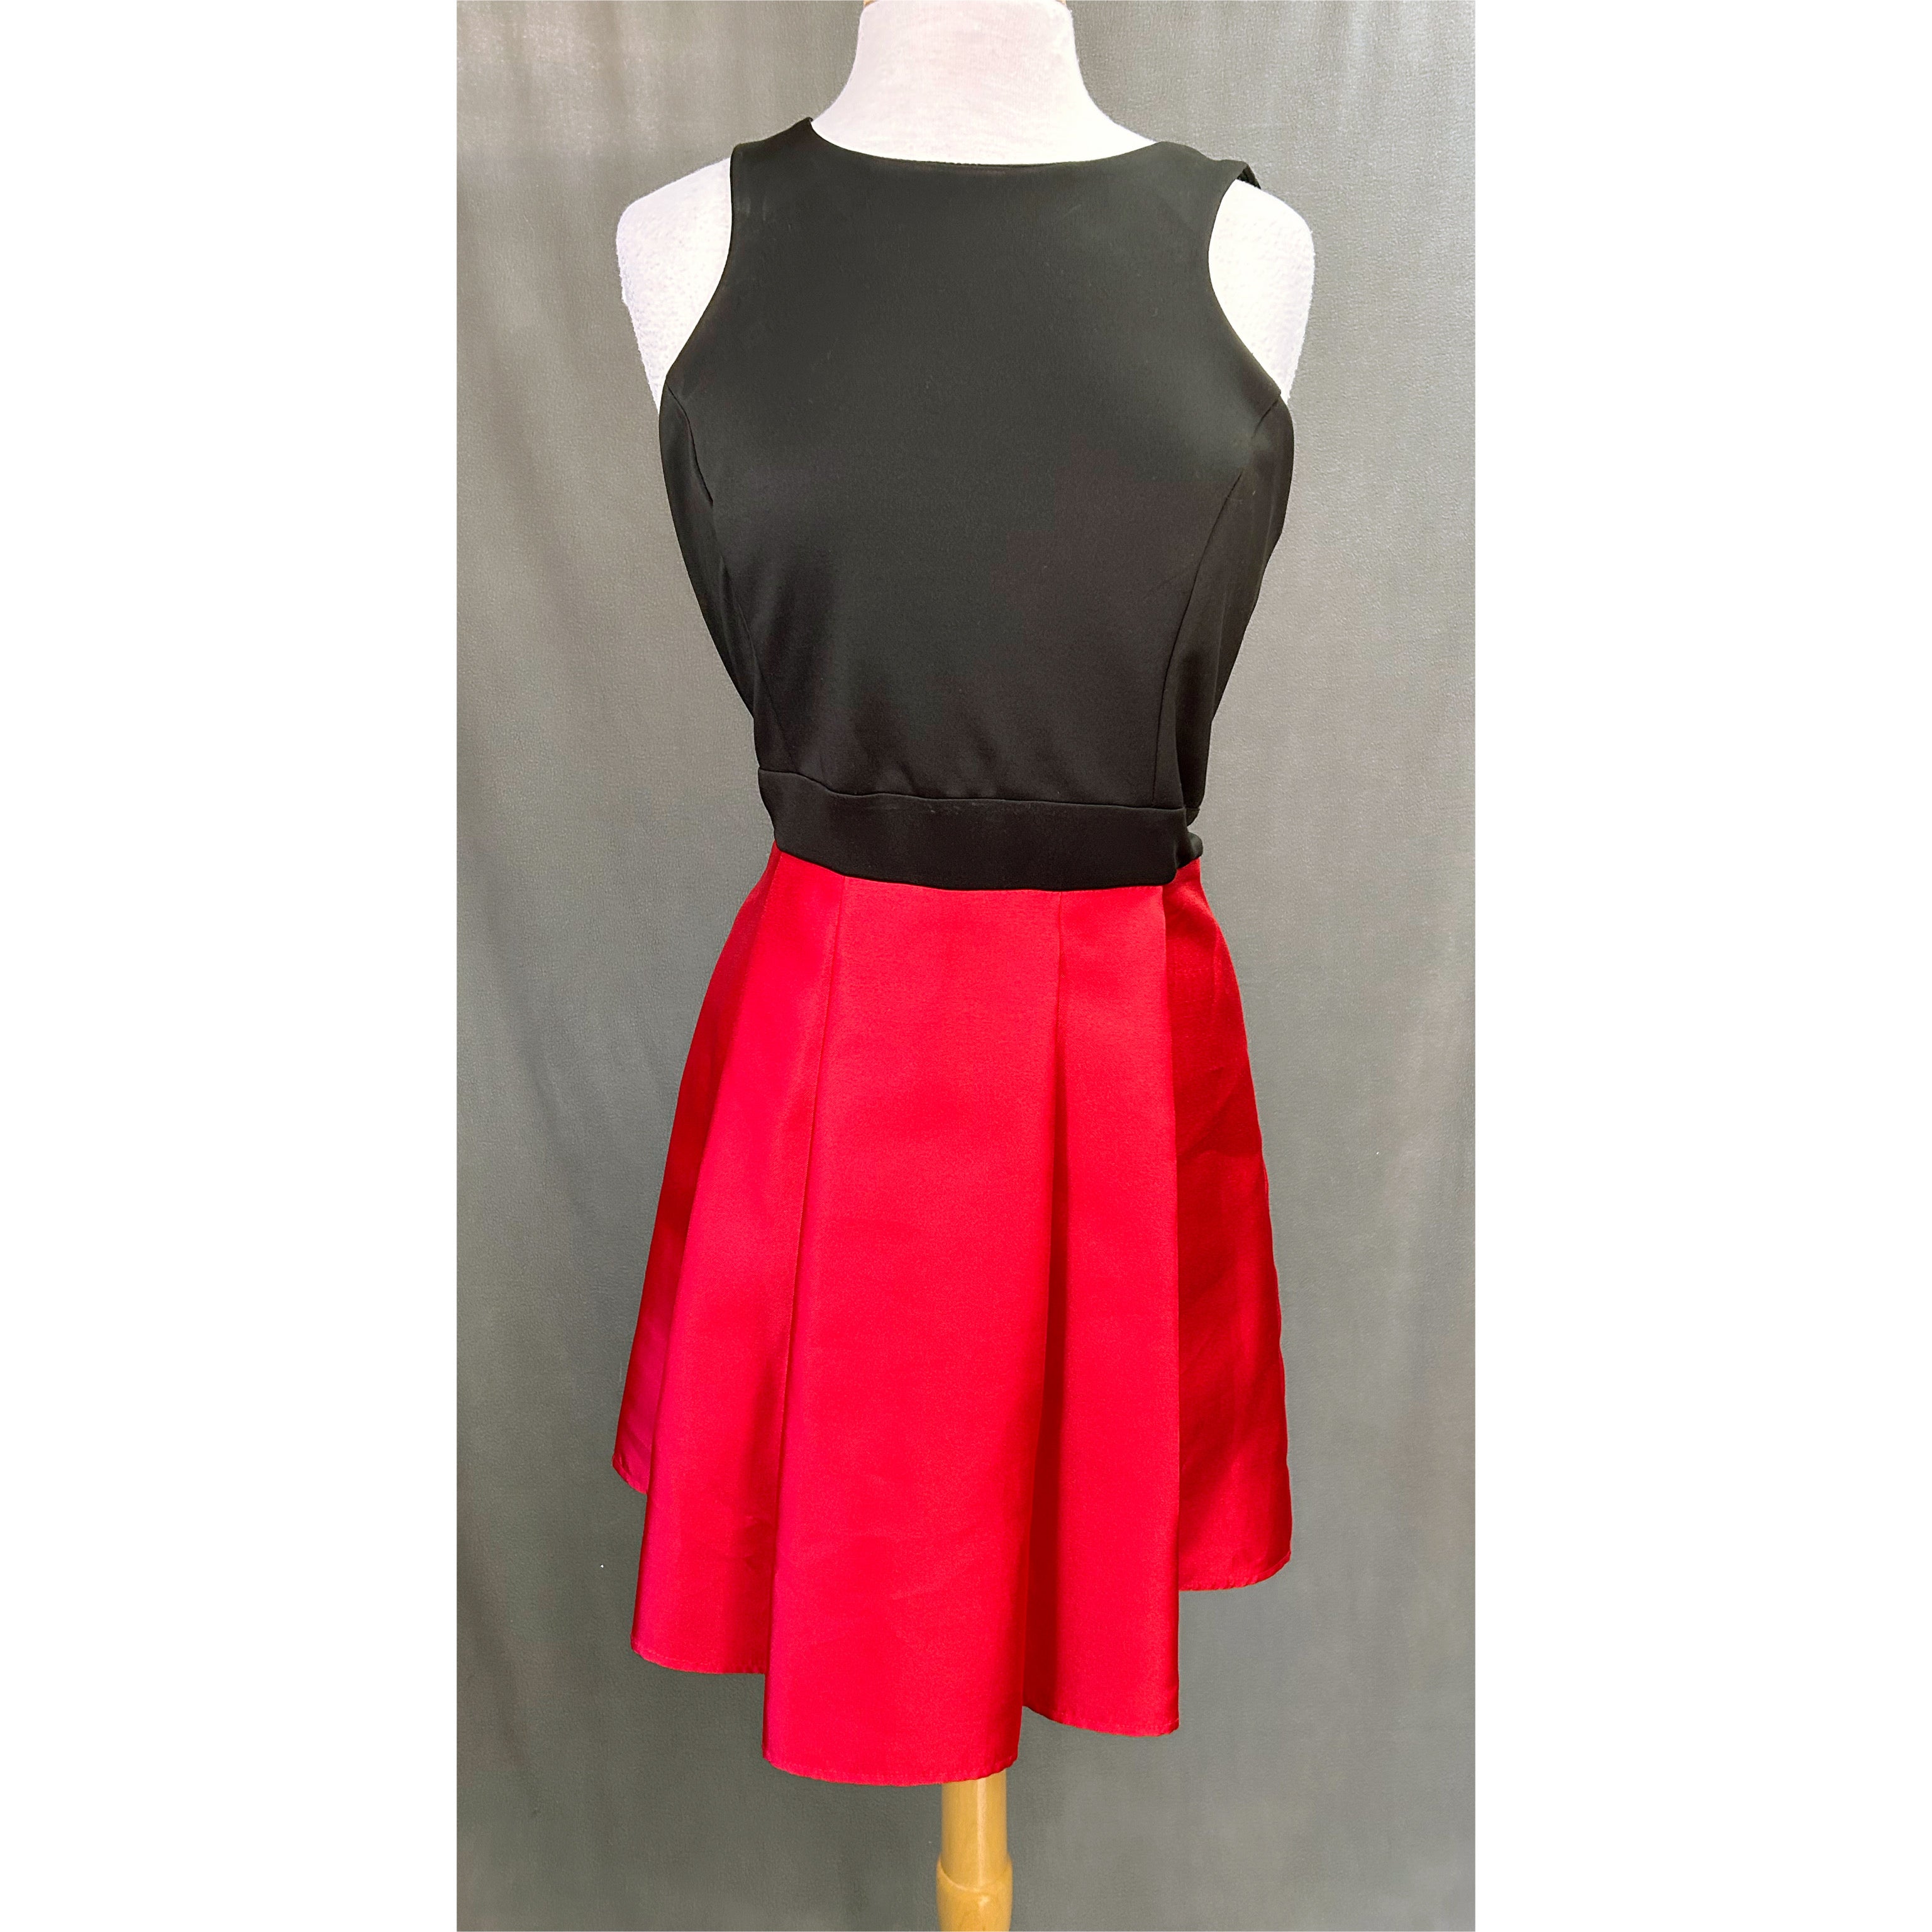 Teeze Me red and black dress, size 15/16